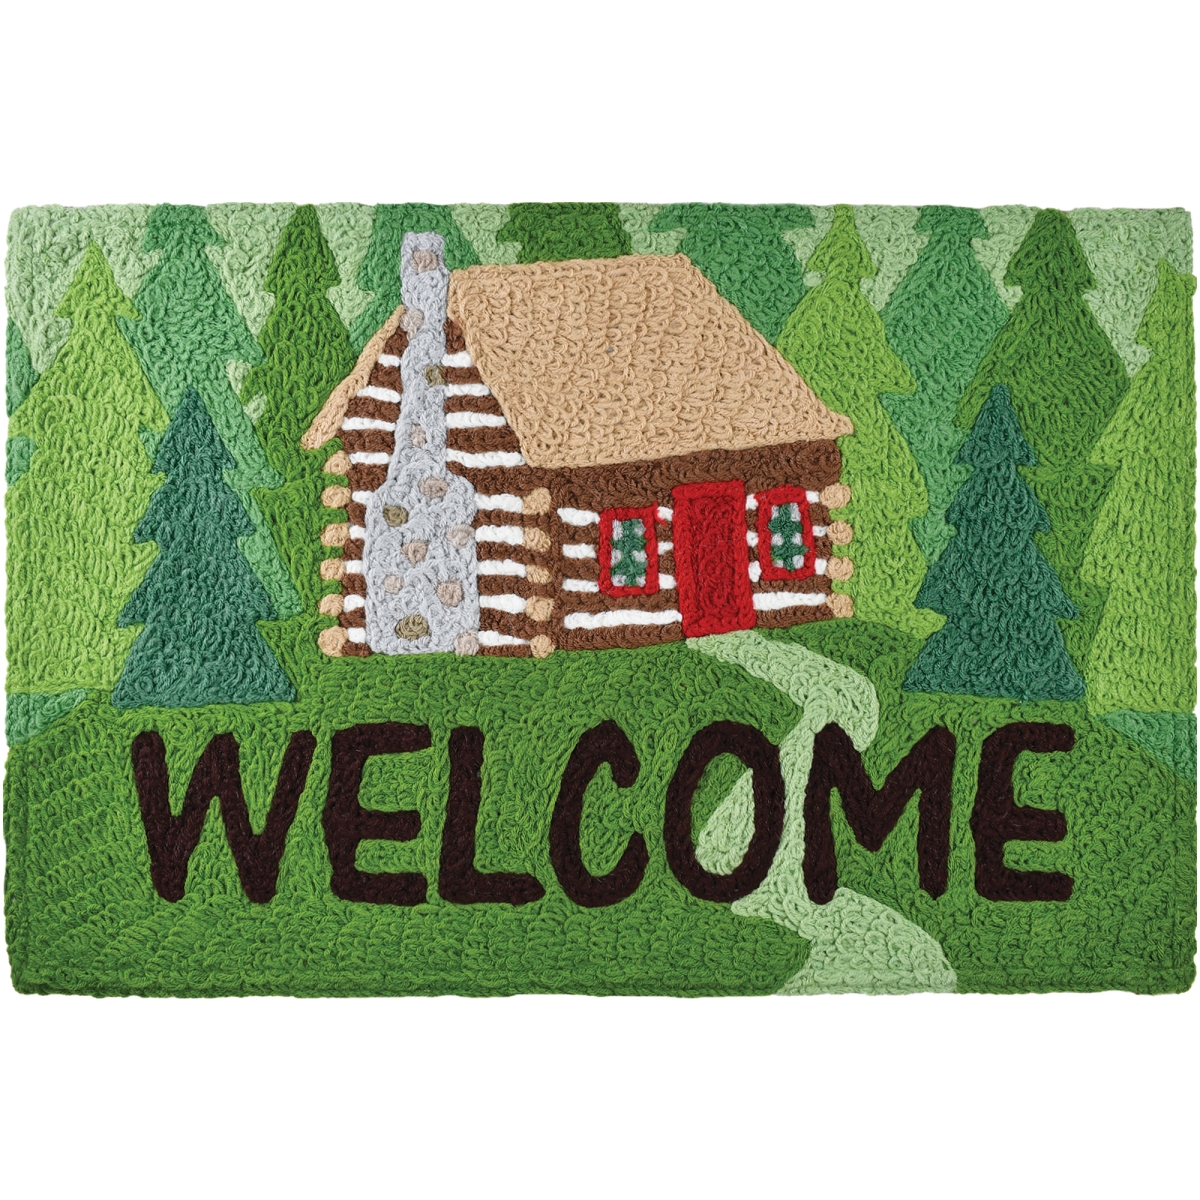 Jb-bbs003 20 X 30 In. Welcome To The Cabin Rug